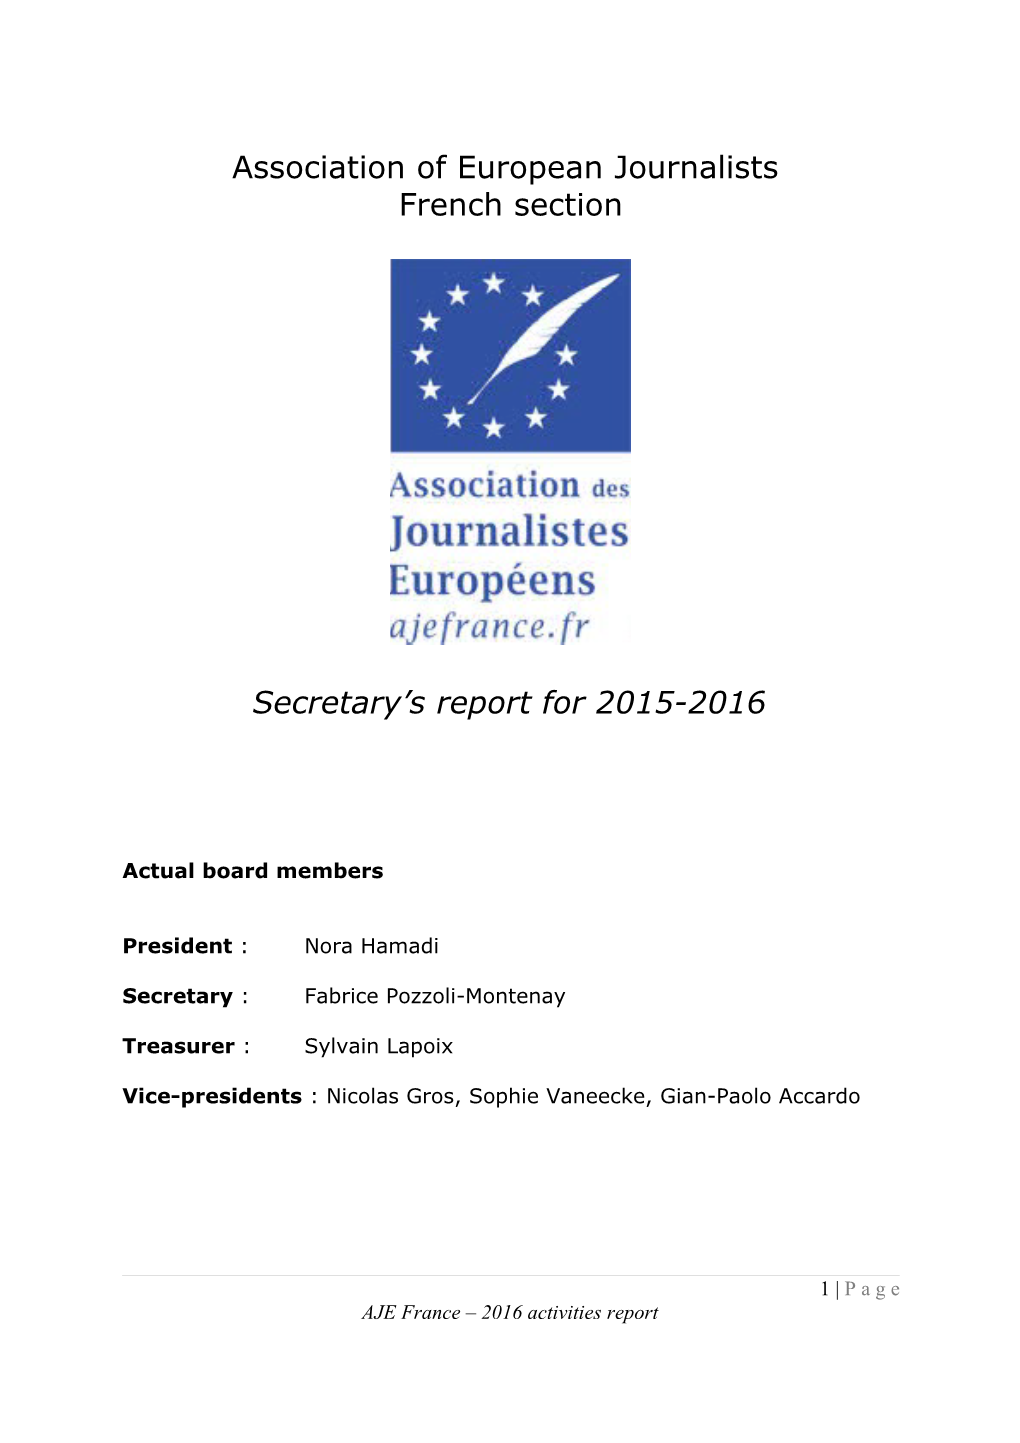 Association Of European Journalists - French Section